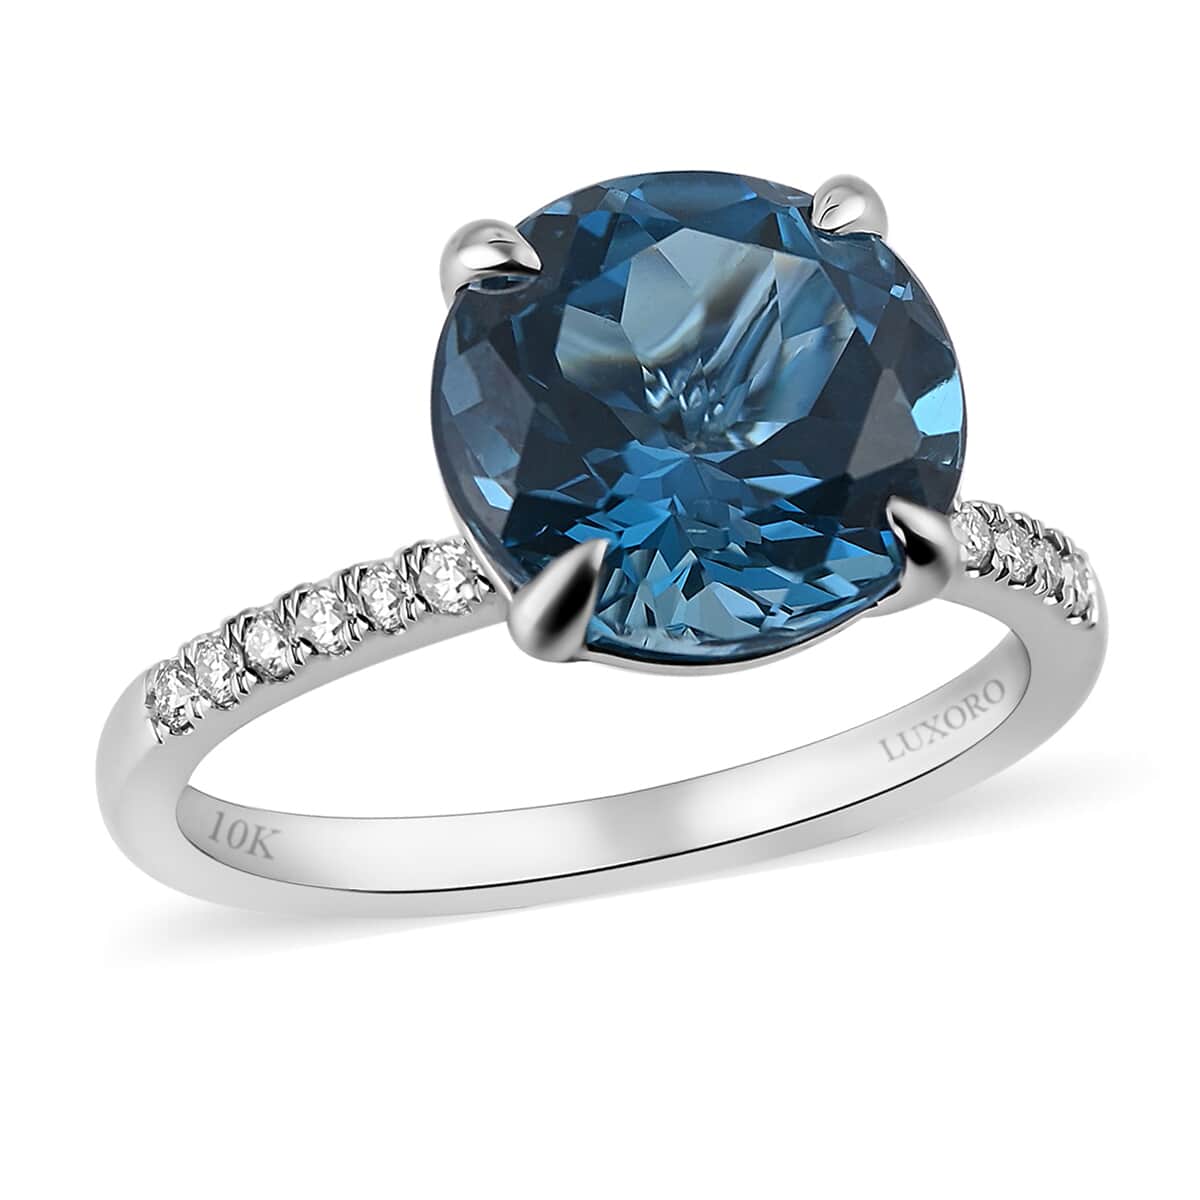 LUXORO 10K White Gold AAA London Blue Topaz and Diamond Solitaire Ring (Size 7.0) 2.40 Grams 4.85 ctw image number 0